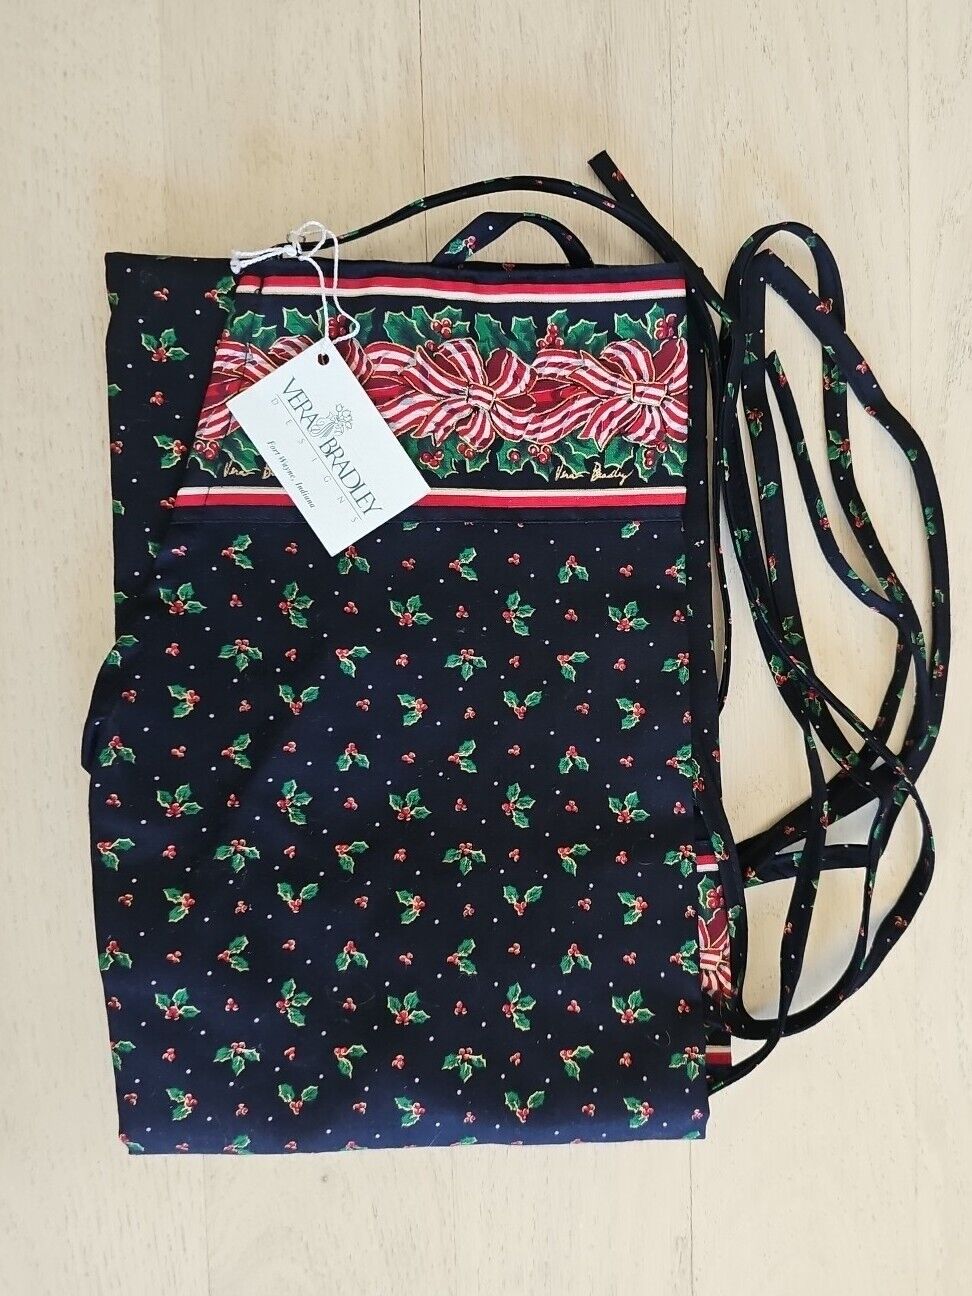 Holliday Gift NEW Vera Bradley Full Apron Christmas Holly Berry Front Pockets